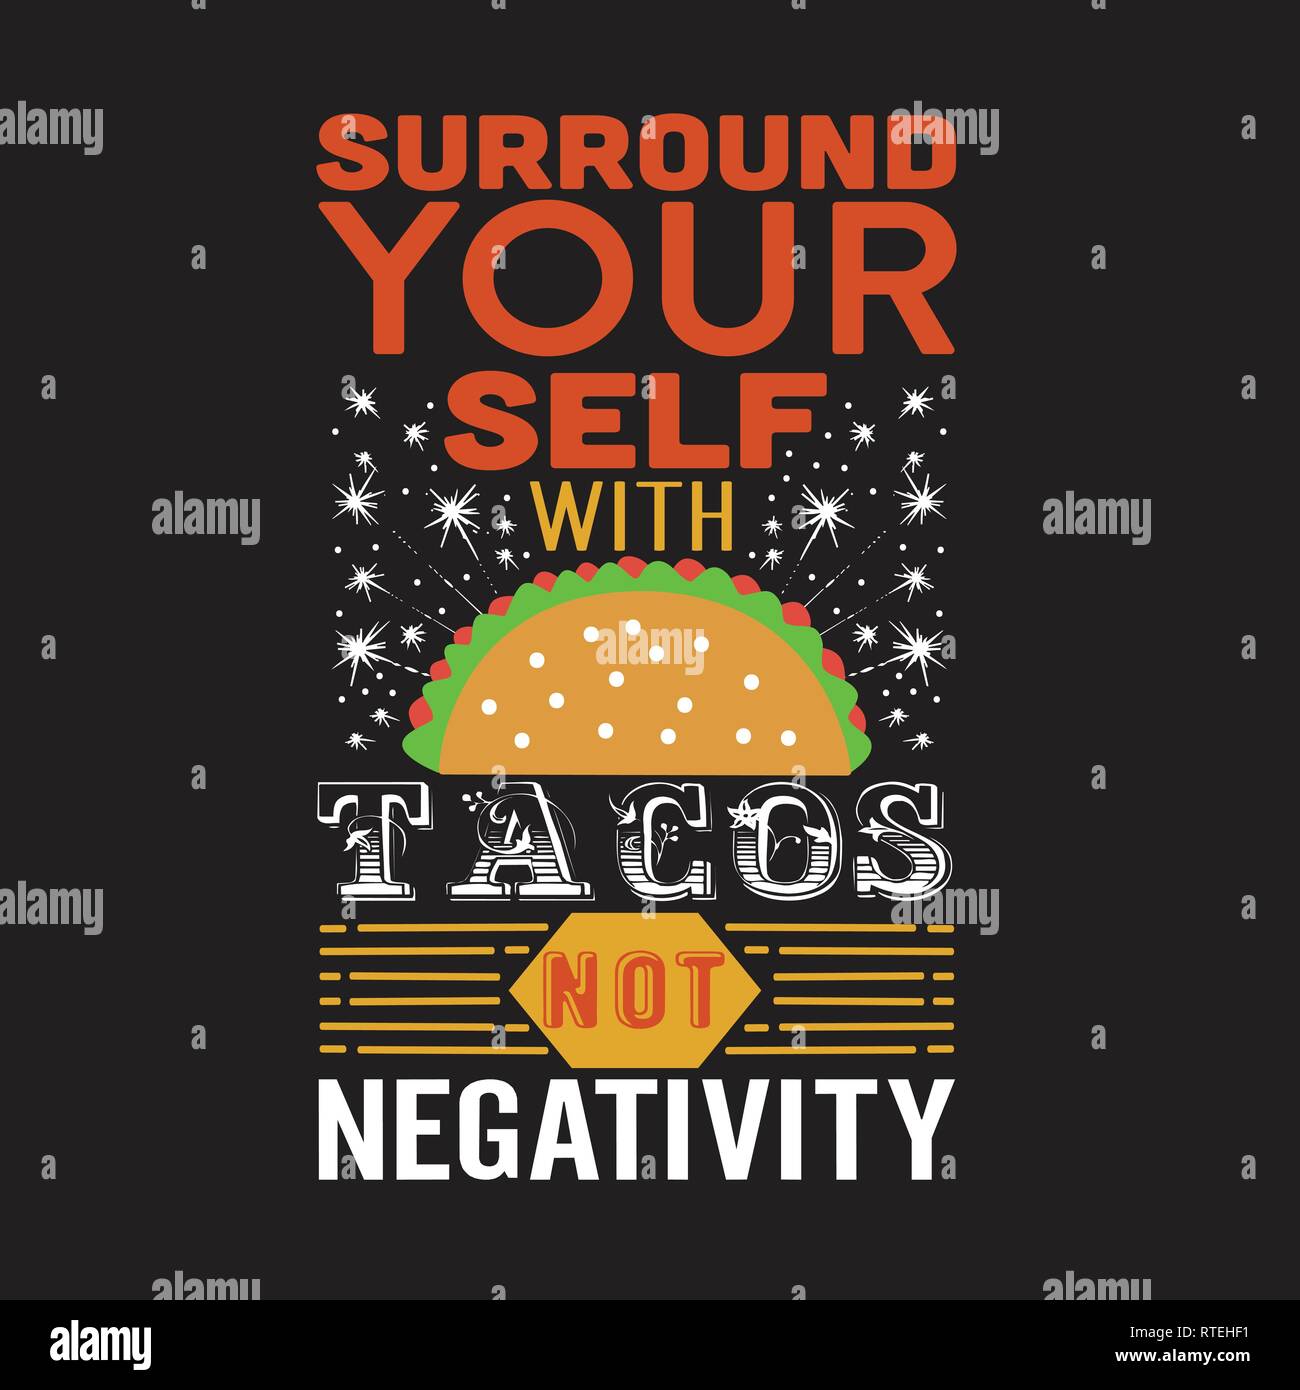 Tacos Quote. Surround your self with tacos not negativity. Stock Vector